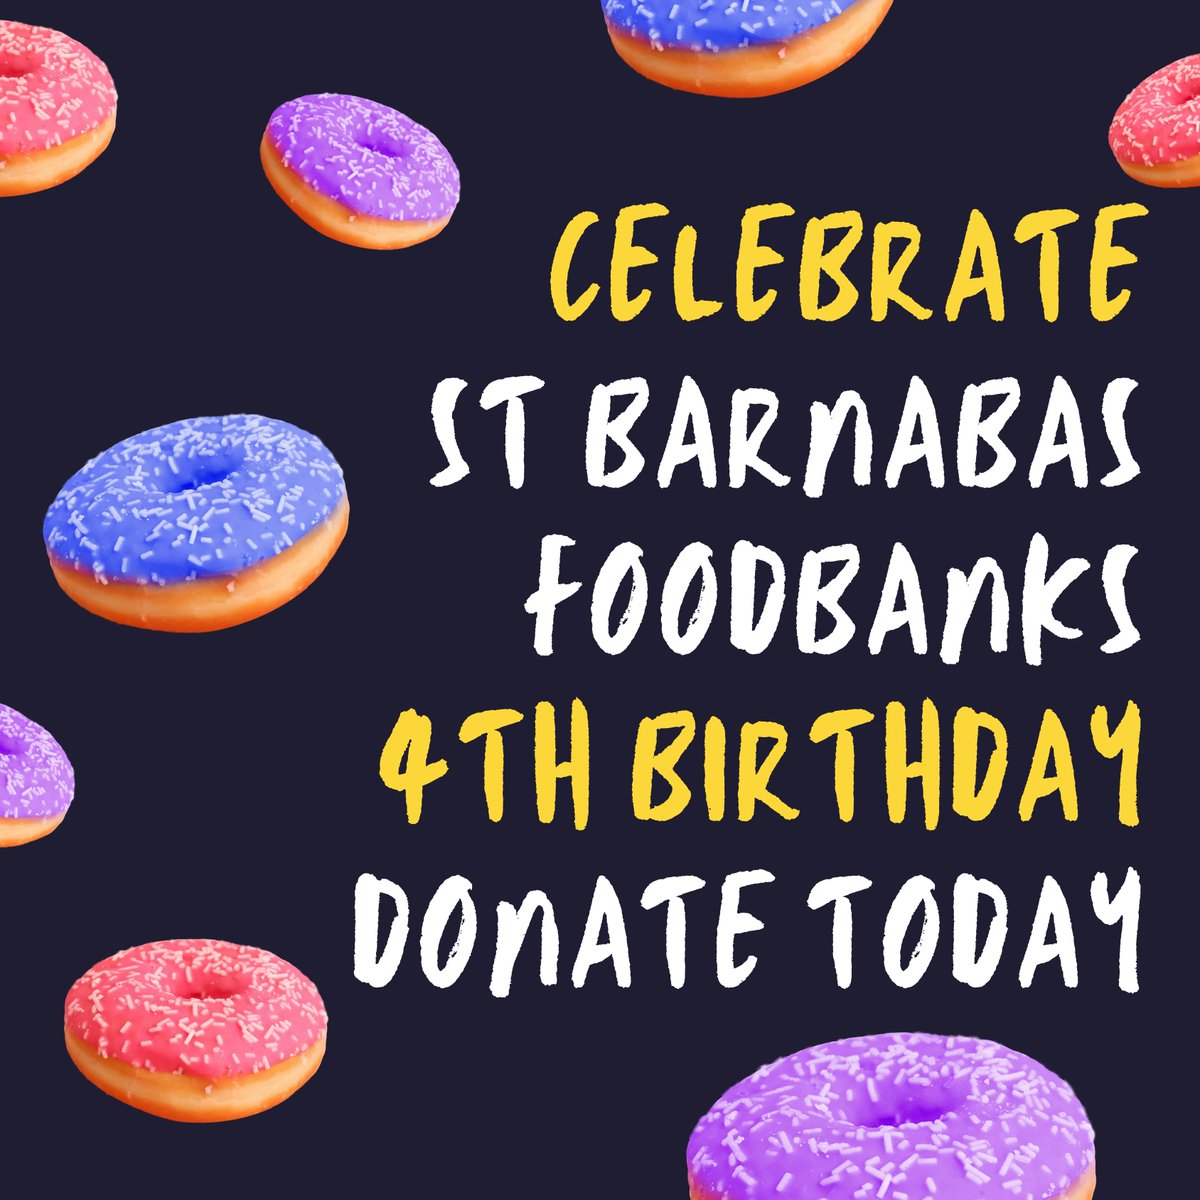 🎉Celebrate St Barnabas Foodbanks 4th Birthday🎉 By donating online at bit.ly/StBsFoodbank #THANKS #BirthdayCelebration @barnetcouncil @BarnetTogether @StBsNL @CompCommunities @dioceseoflondon @churchofengland